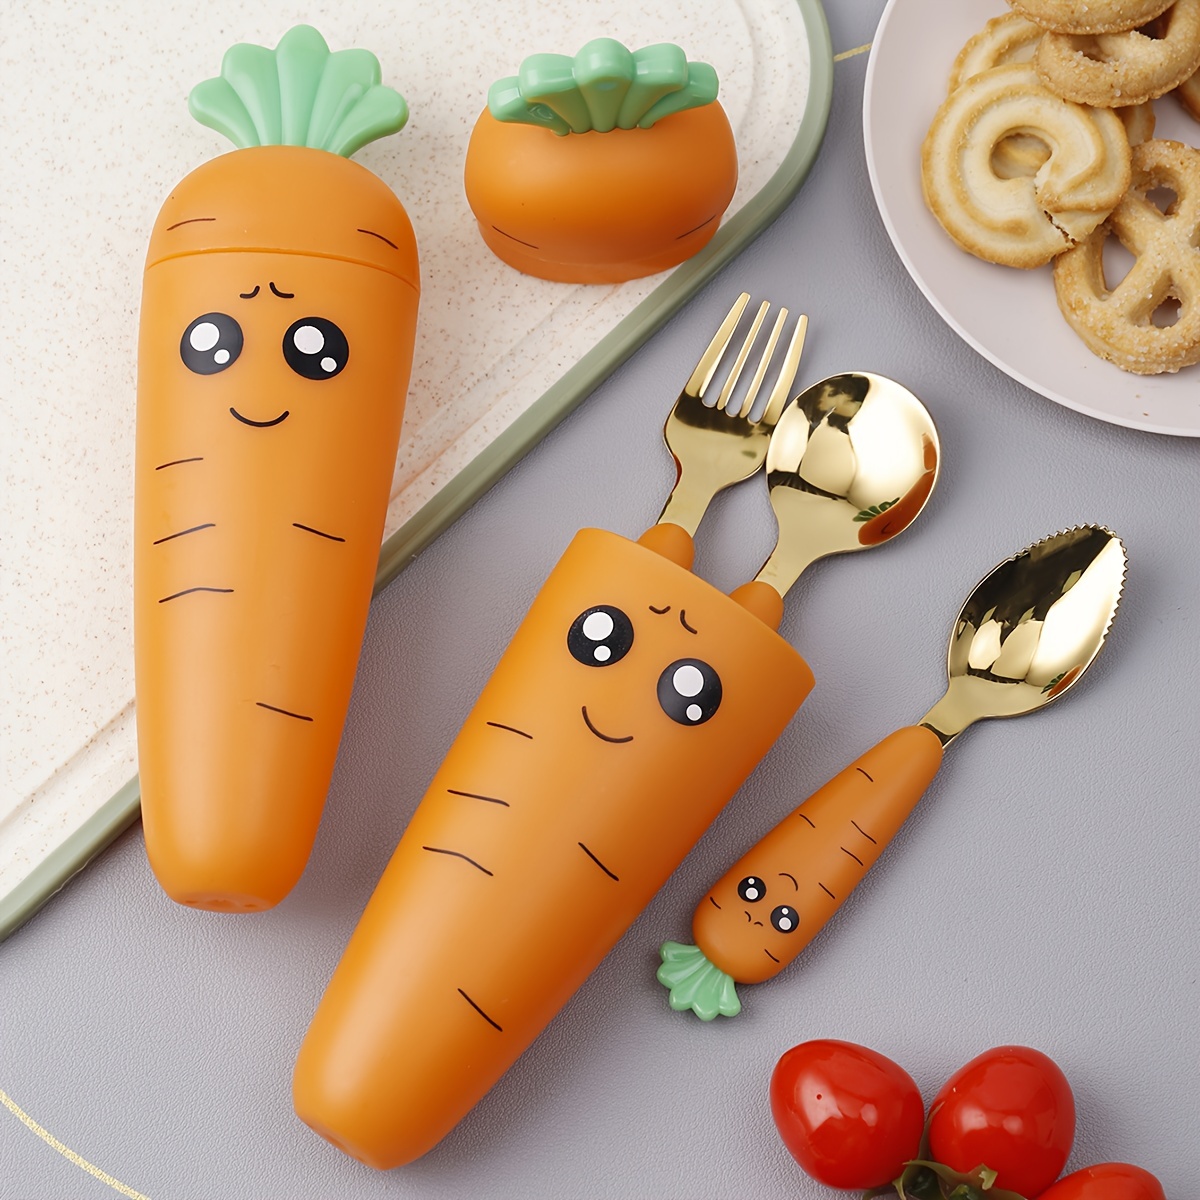 4Pcs Carrot Shape Travel Utensil Sets For Lunch, 304 Stainless Steel  Camping Cutlery Set With Cute Carrot Shape & Storage Box, Reusable Flatware